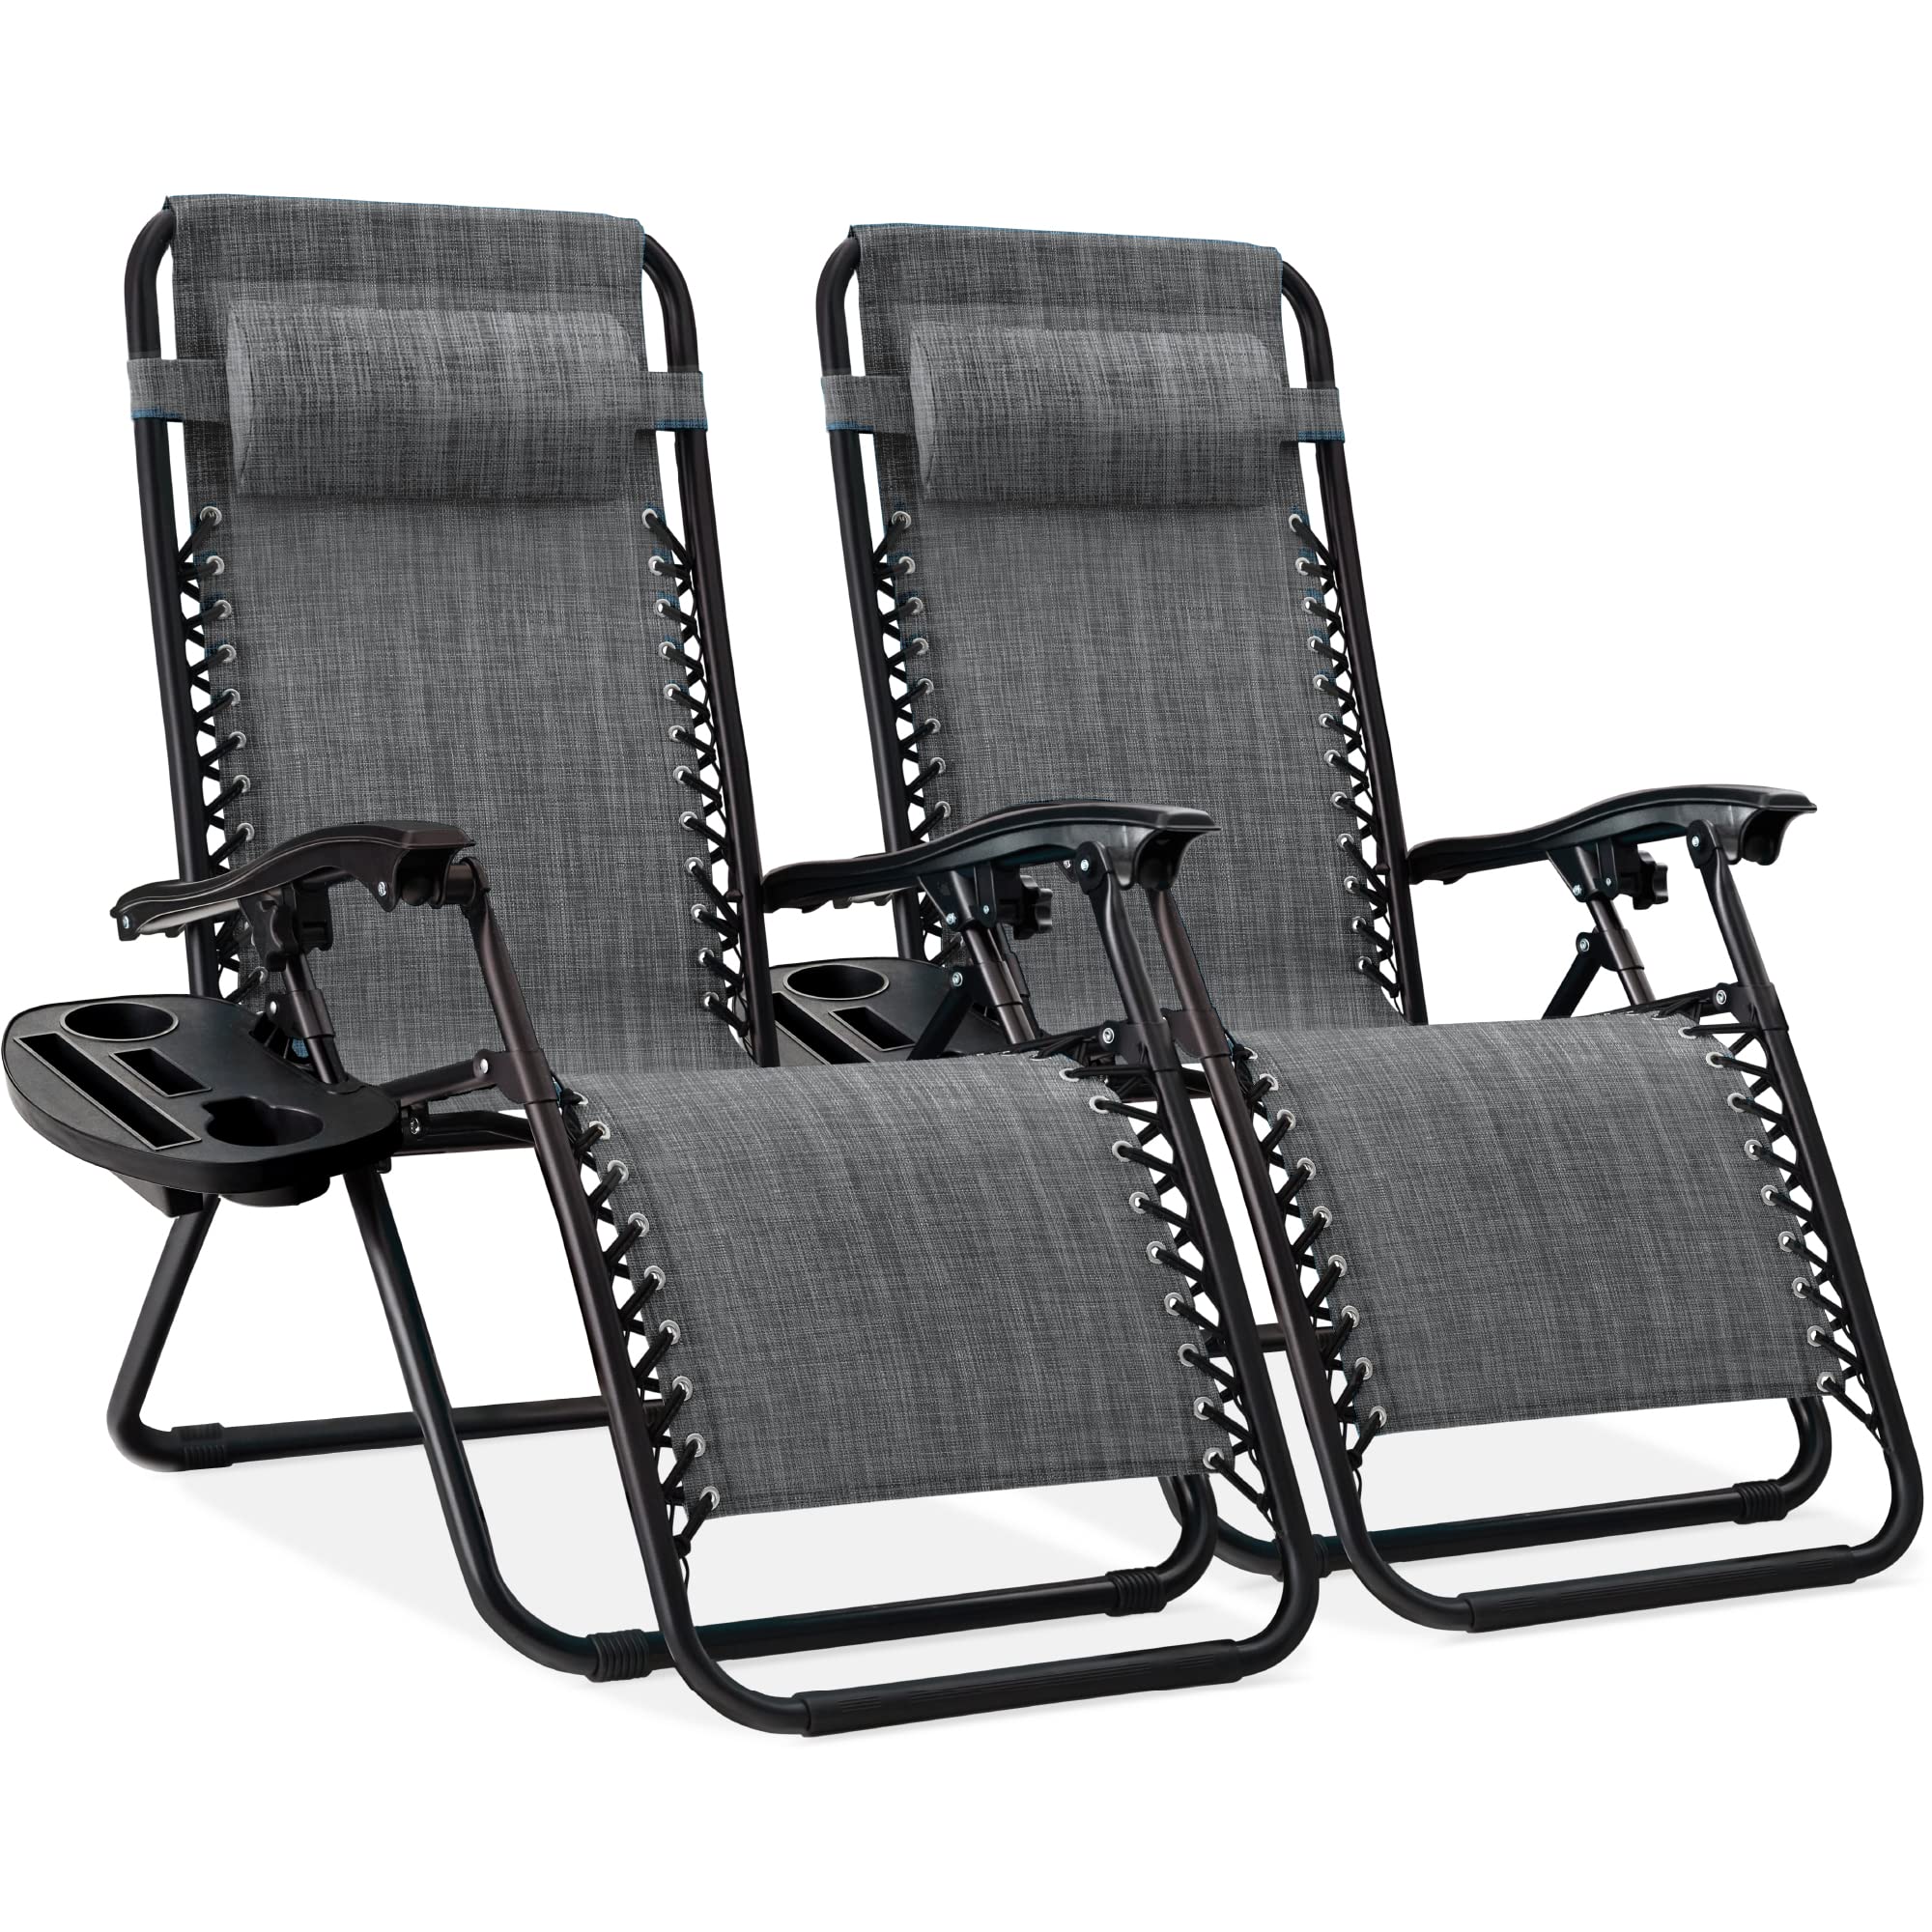 Best Choice Products Set of 2 Adjustable Steel Mesh Zero Gravity Lounge Chair Recliners w/Pillows and Cup Holder Trays, Gray Grey